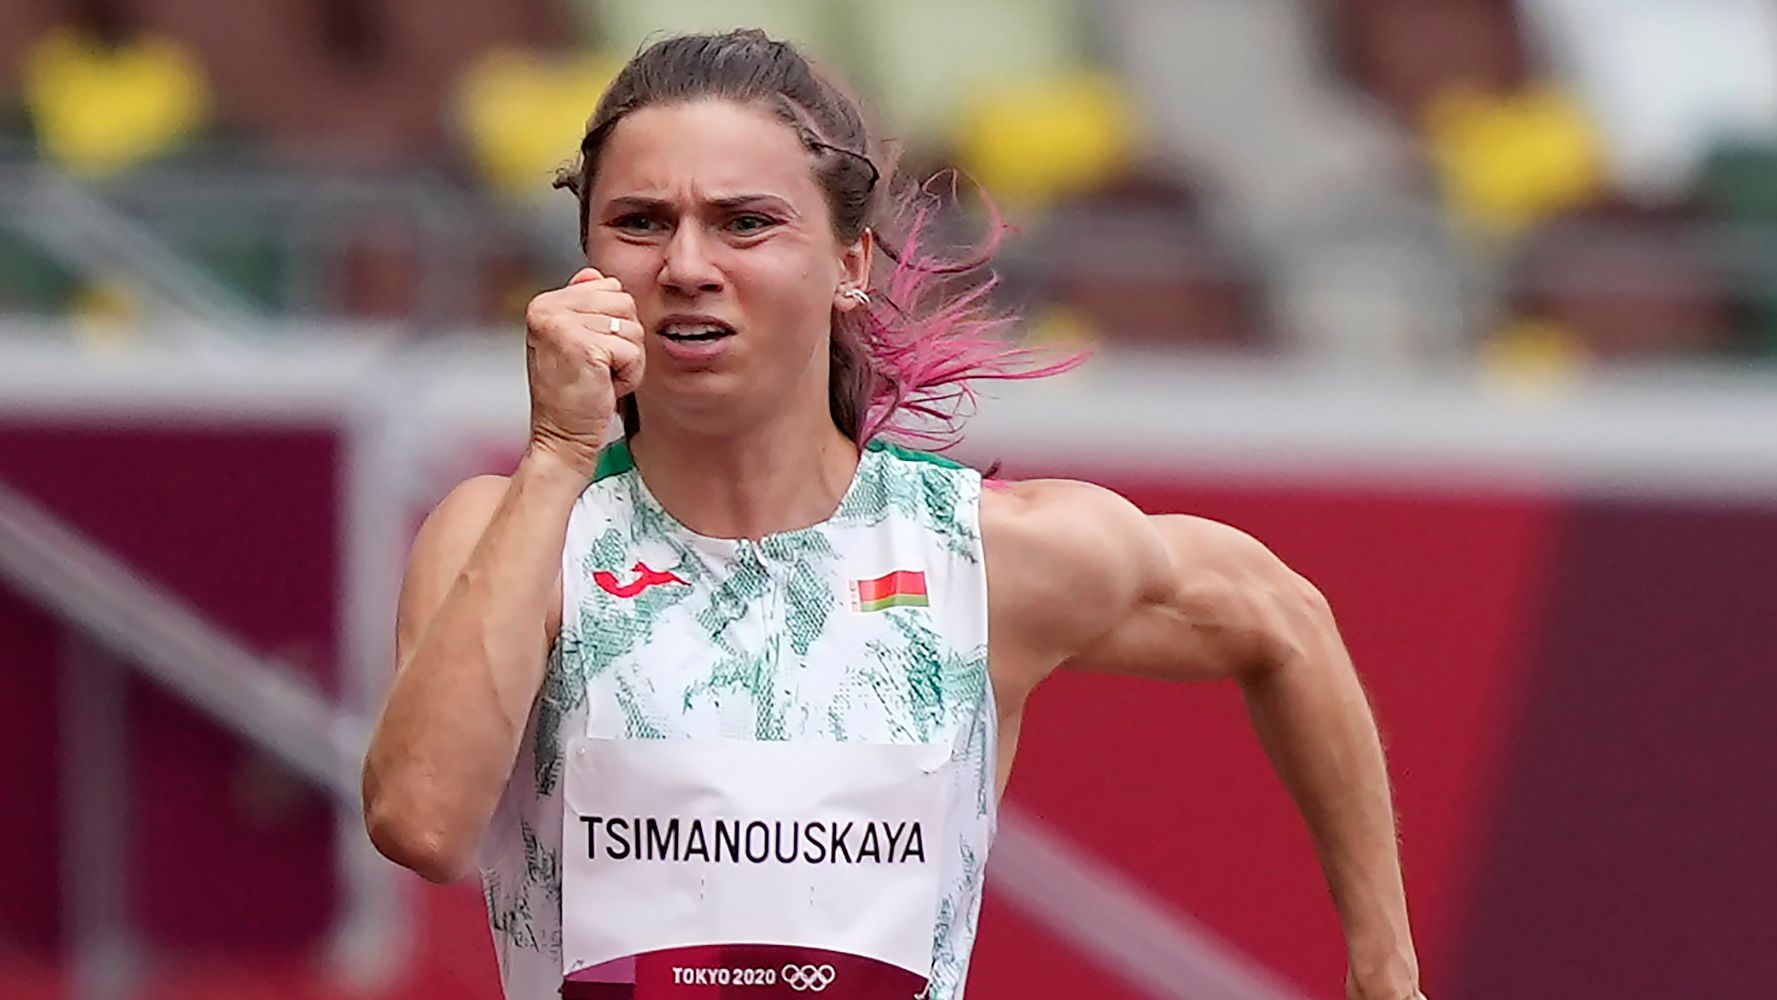 Belarus Runner Alleges Olympic Team Forcibly Tried To Send Her Home